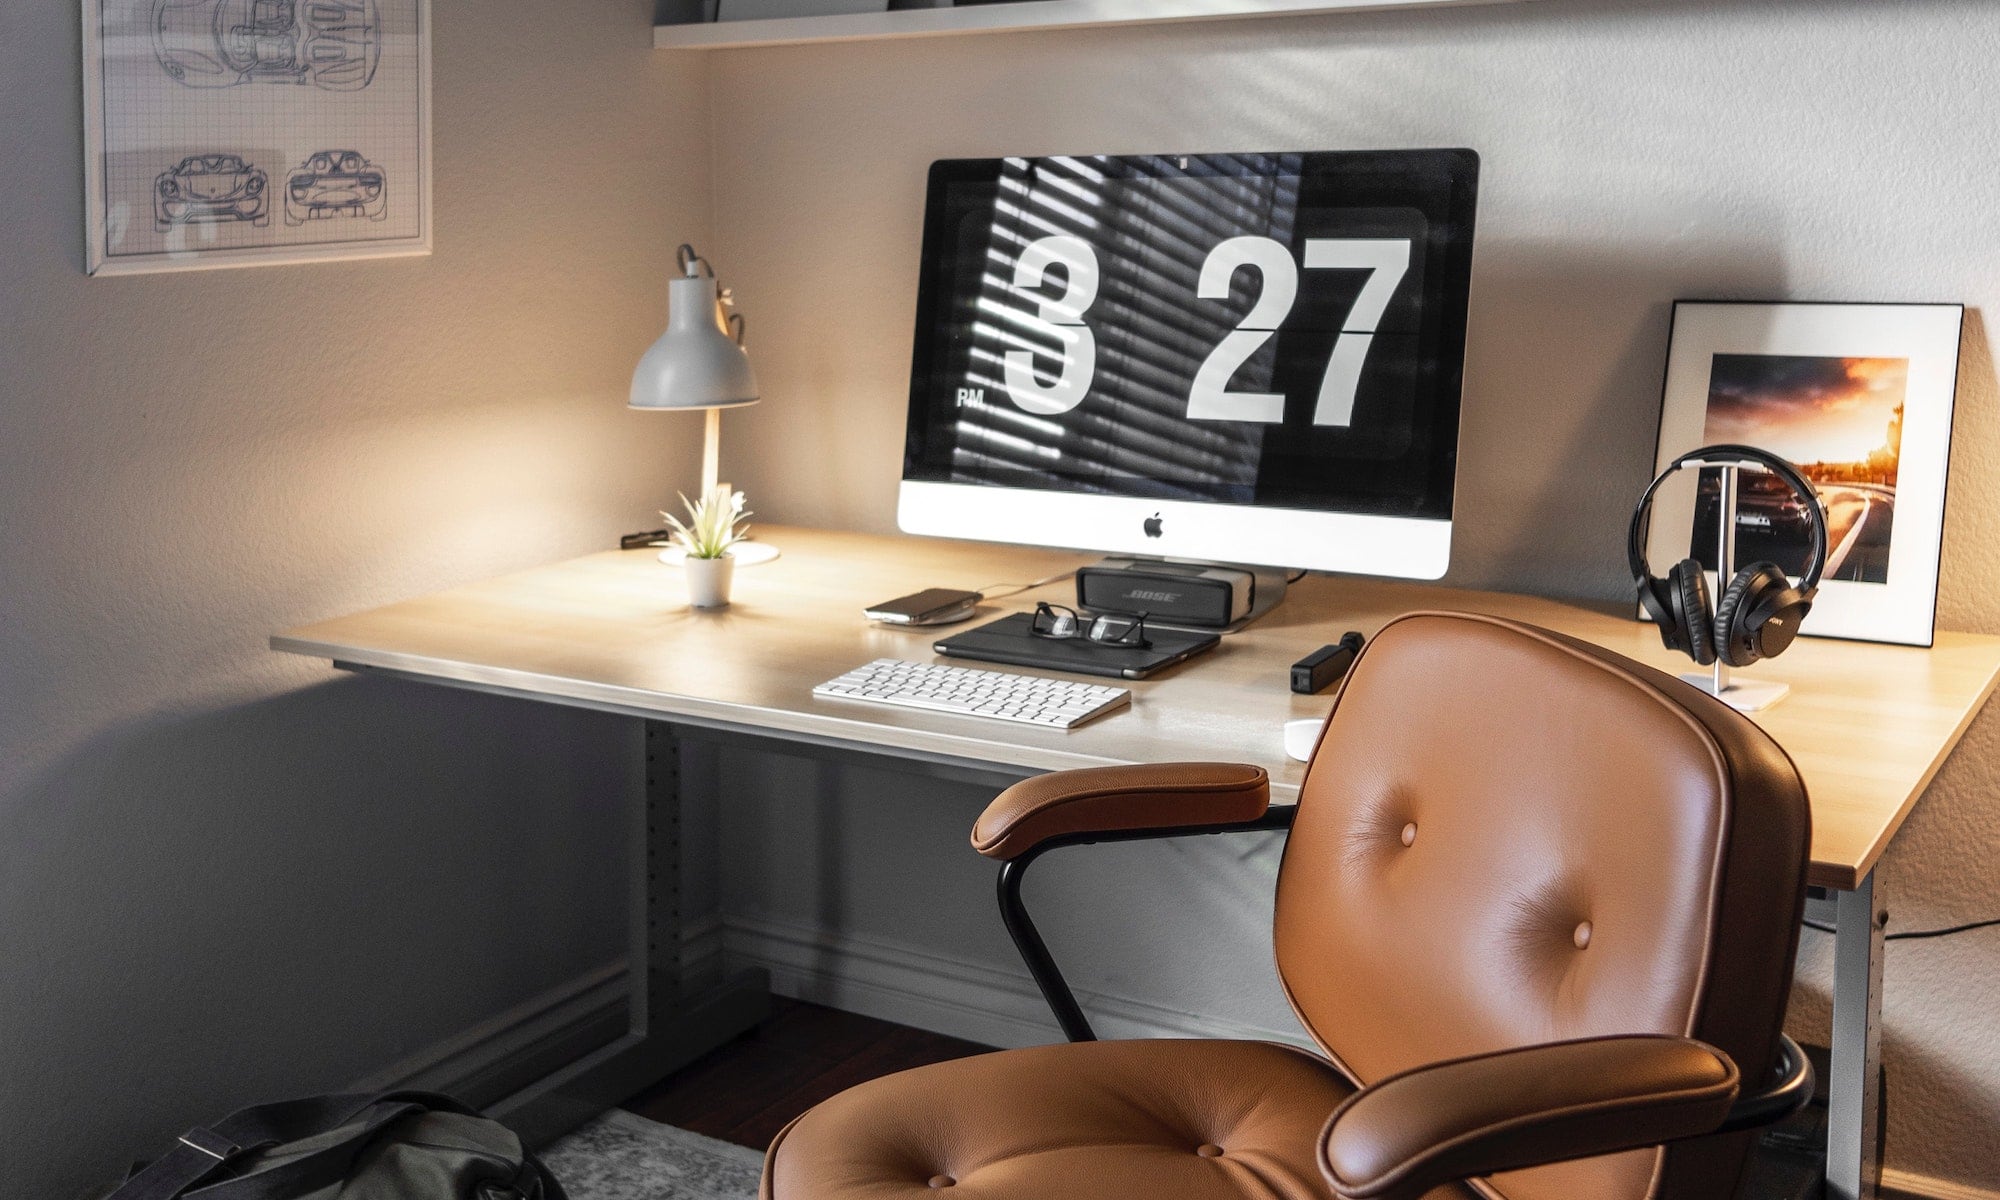 10 workspace gadgets for a futuristic home office » Gadget Flow